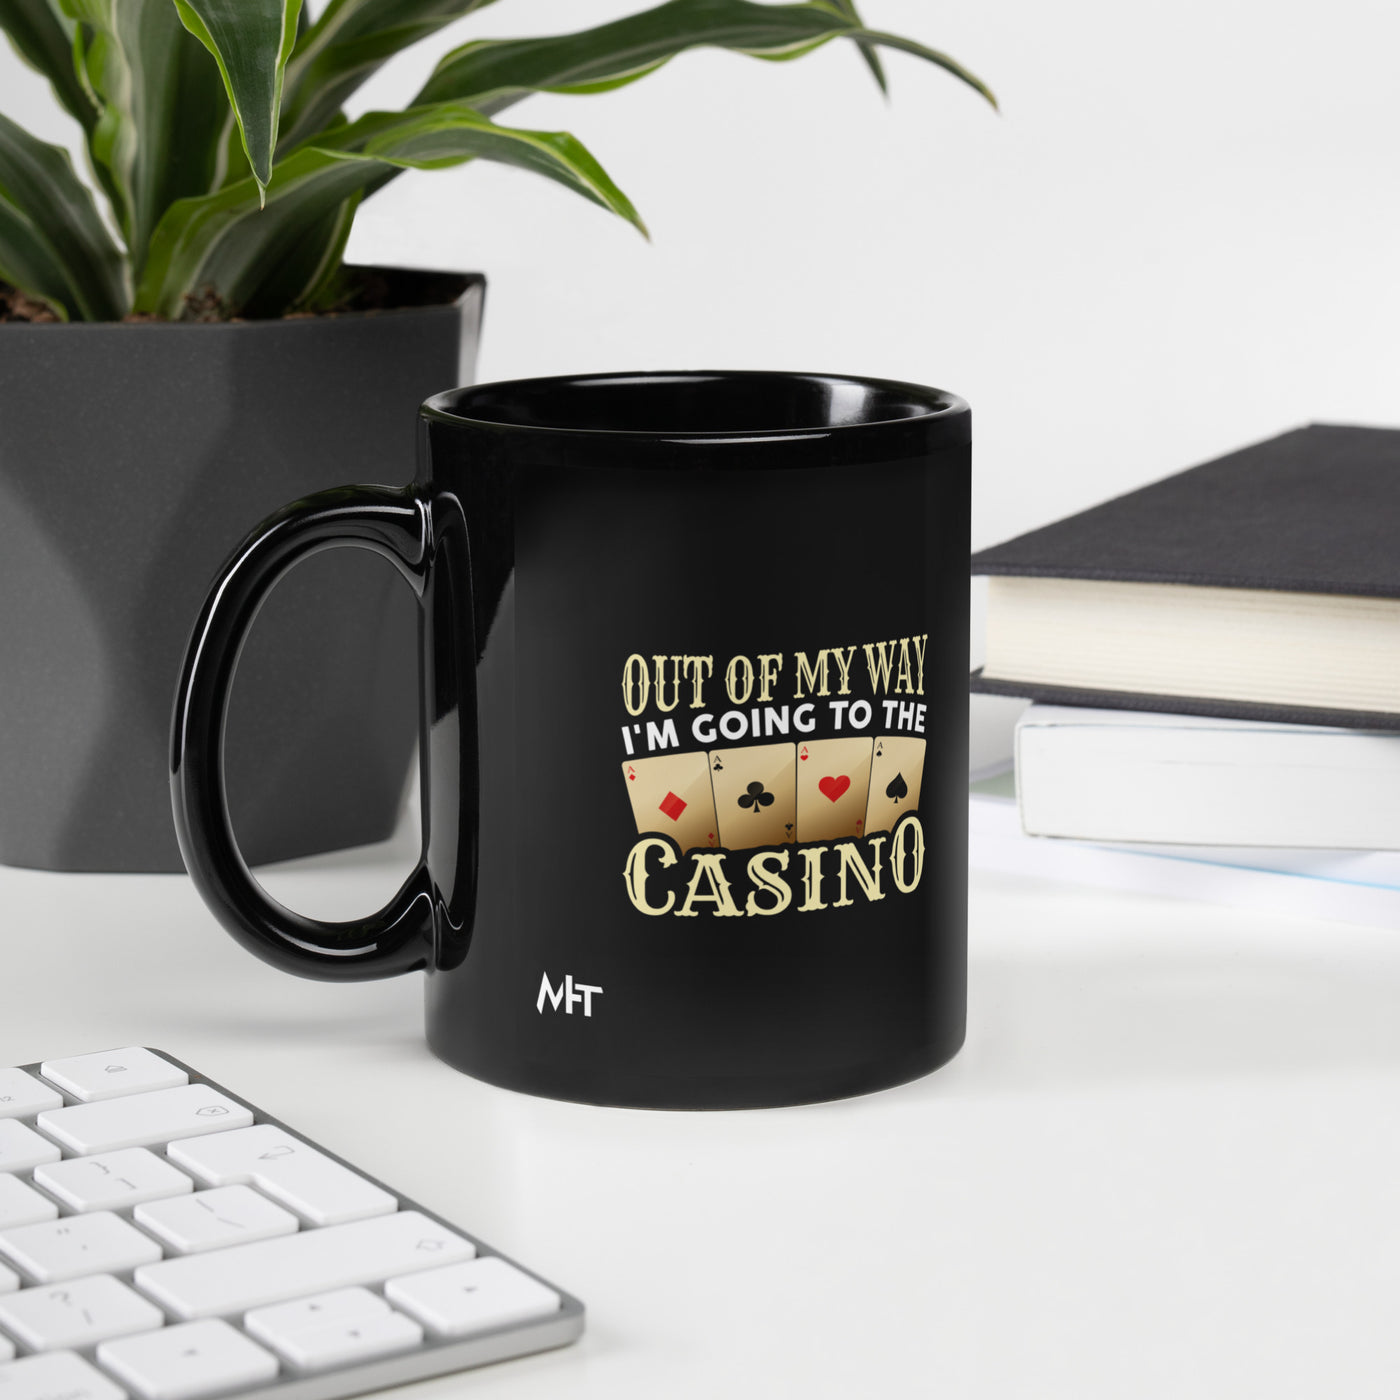 Out of My way; I am Going to the Casino - Black Glossy Mug